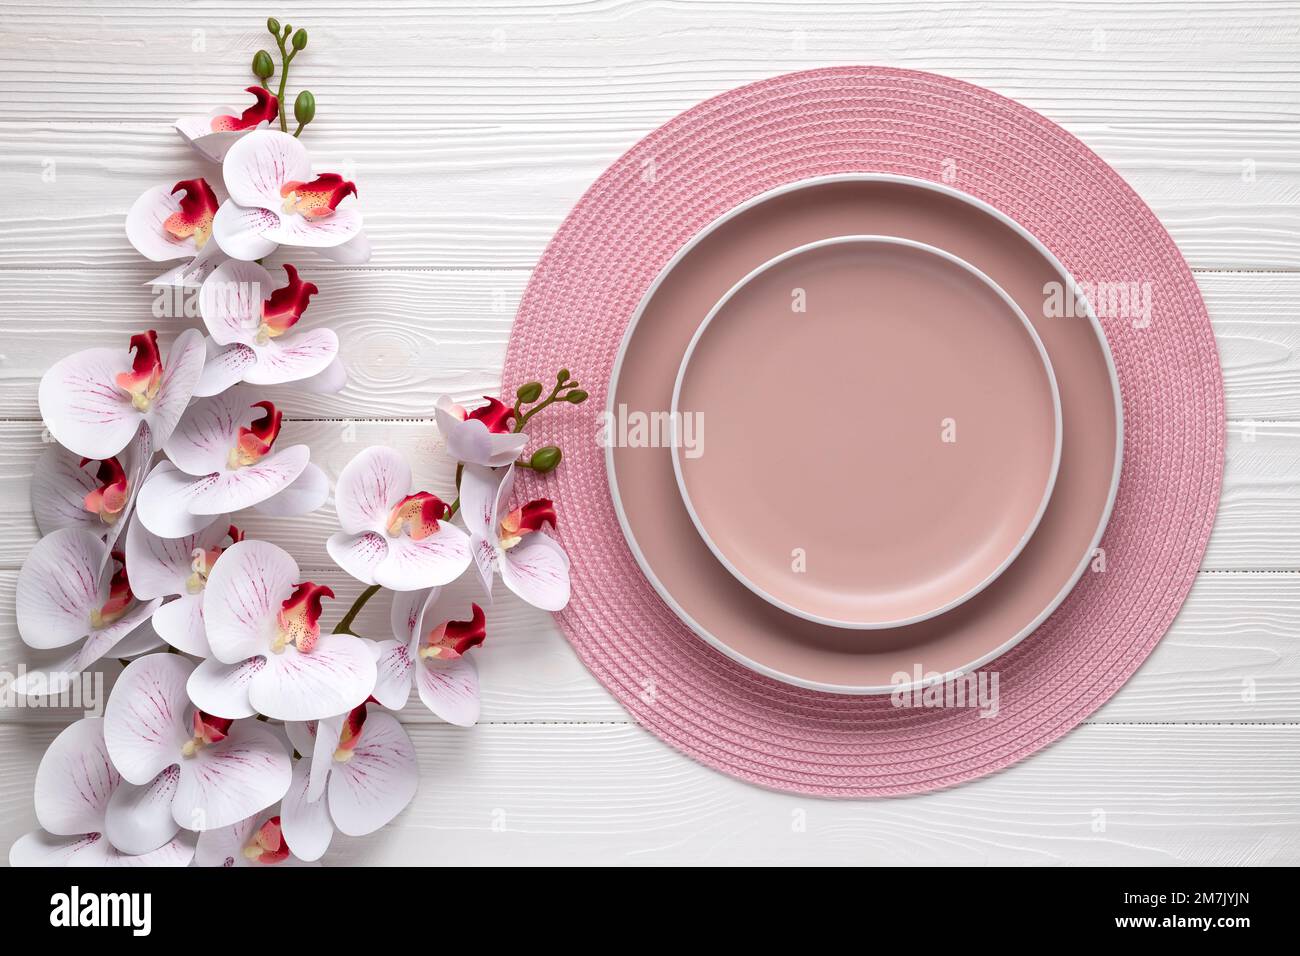 Empty plates and round pink napkin on white wooden table. Place setting with beige dishes. Dining ware. Festive card or menu template with copy space, Stock Photo